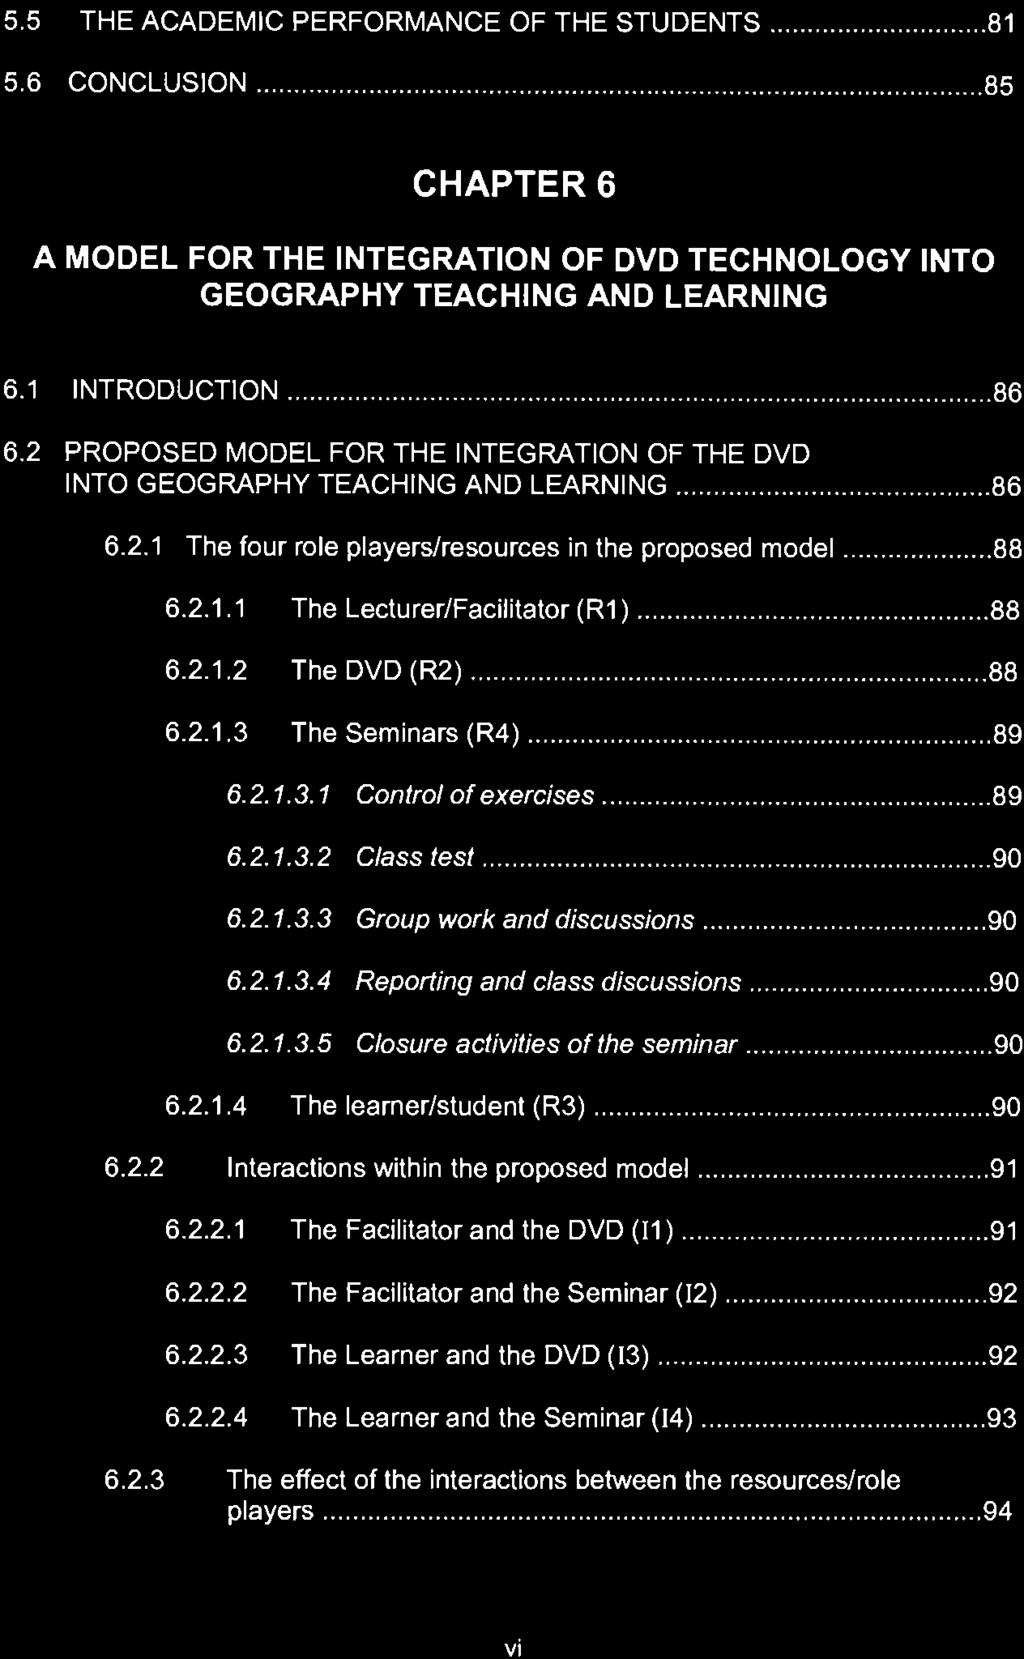 5.5 THE ACADEMIC PERFORMANCE OF THE STUDENTS... 81 5.6 CONCLUSION... 85 CHAPTER 6 A MODEL FOR THE INTEGRATION OF DVD TECHNOLOGY INTO GEOGRAPHY TEACHING AND LEARNING 6.1 INTRODUCTION......... 6.2 PROPOSED MODEL FOR THE INTEGRATION OF THE DVD INTO GEOGRAPHY TEACHING AND LEARN1 NG.